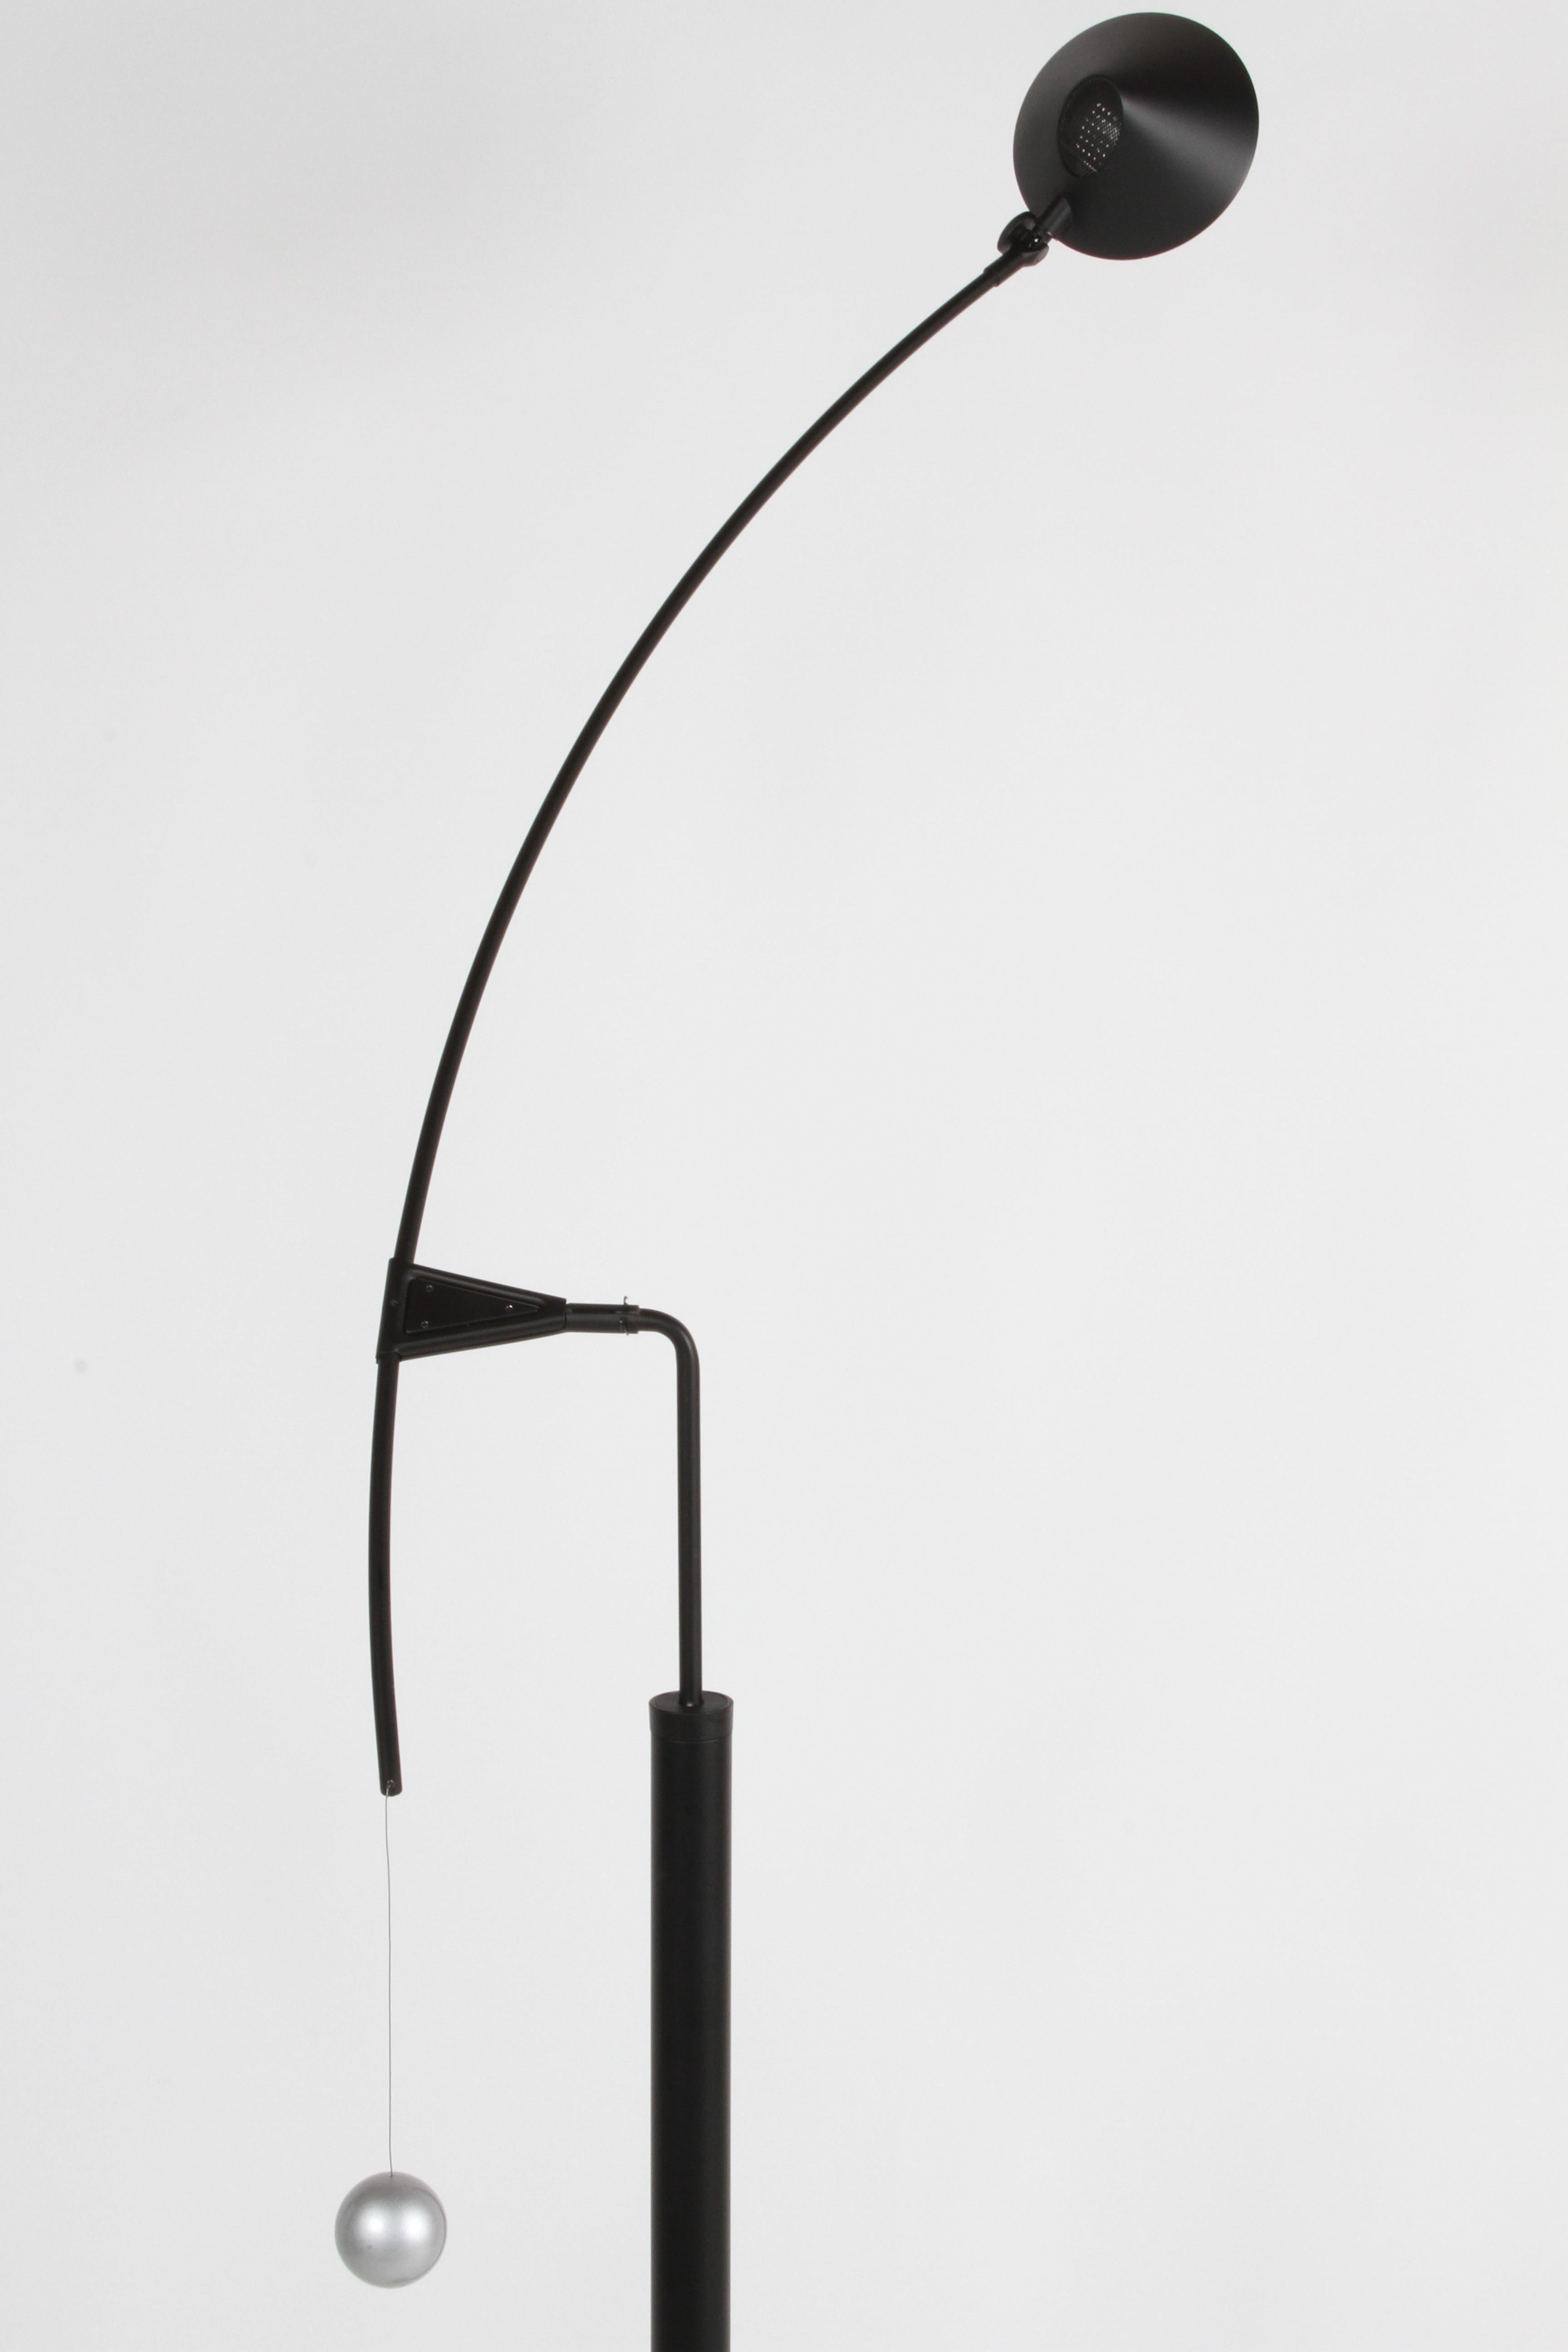 Vintage Carlo Forcolini Post-Modern Black Floor Lamp for Artemide Italy, 1980s For Sale 3